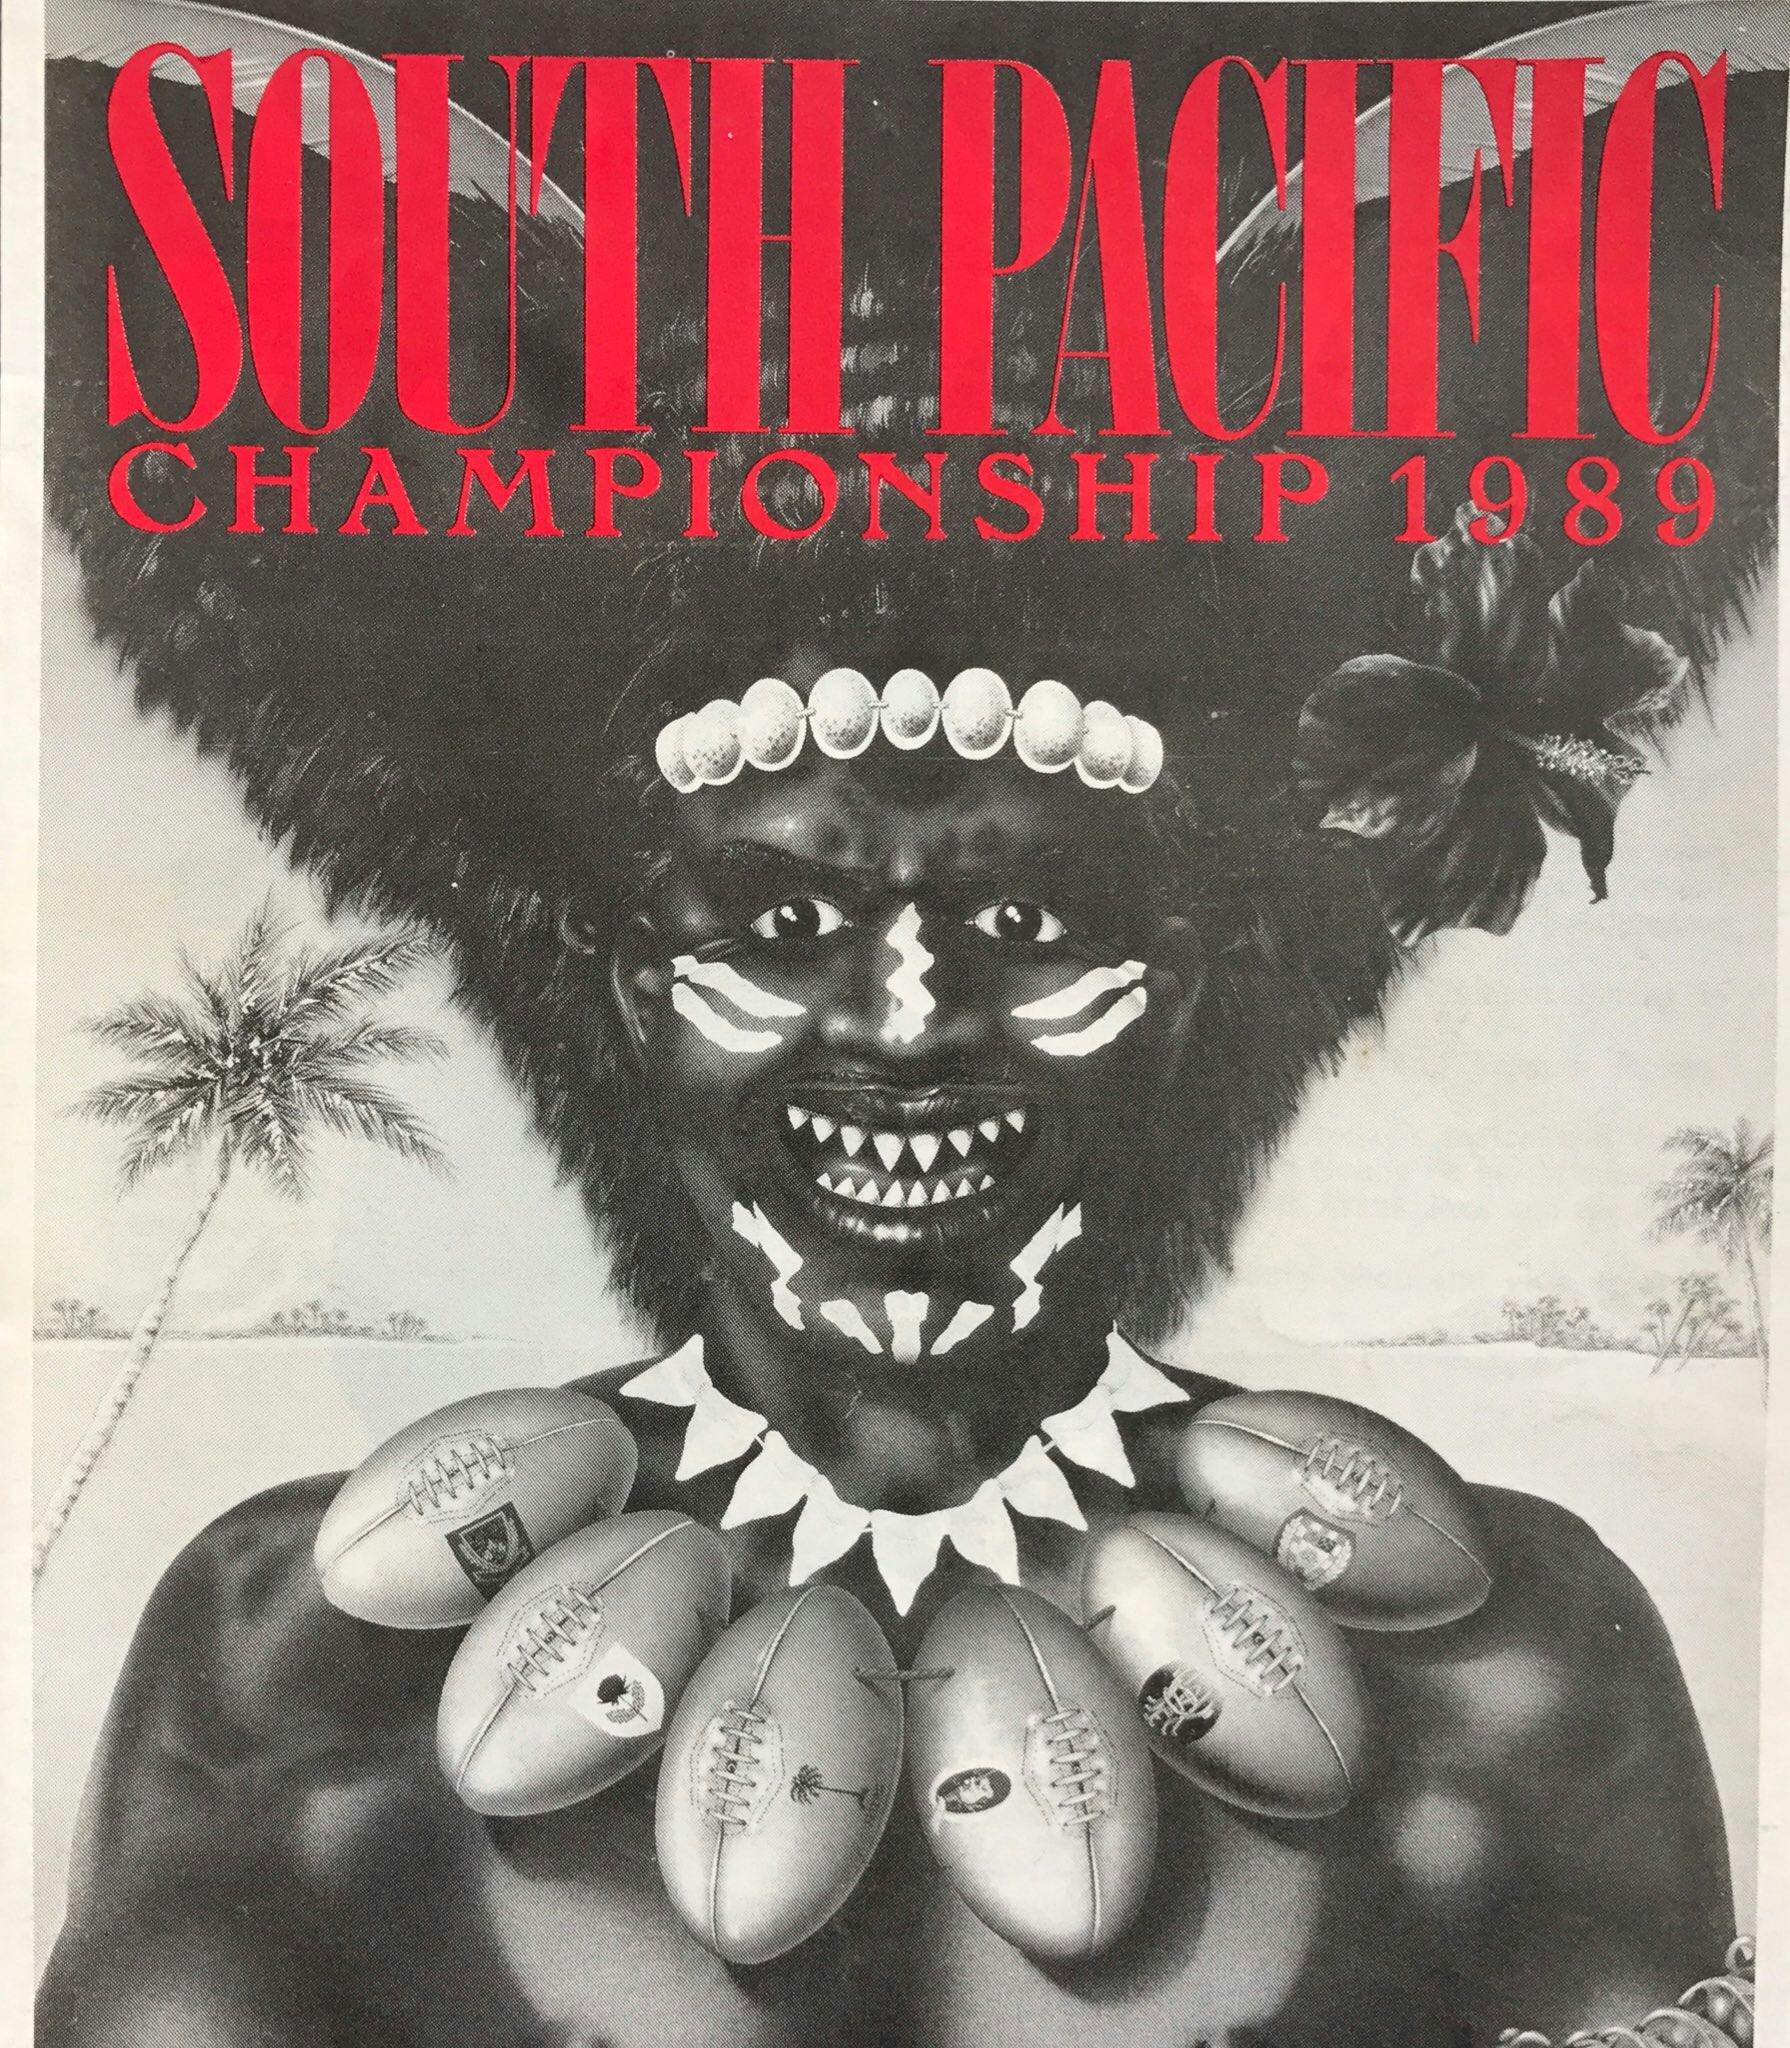 Fiji played a foundation role in the five-team South Pacific Championship from 1986-90